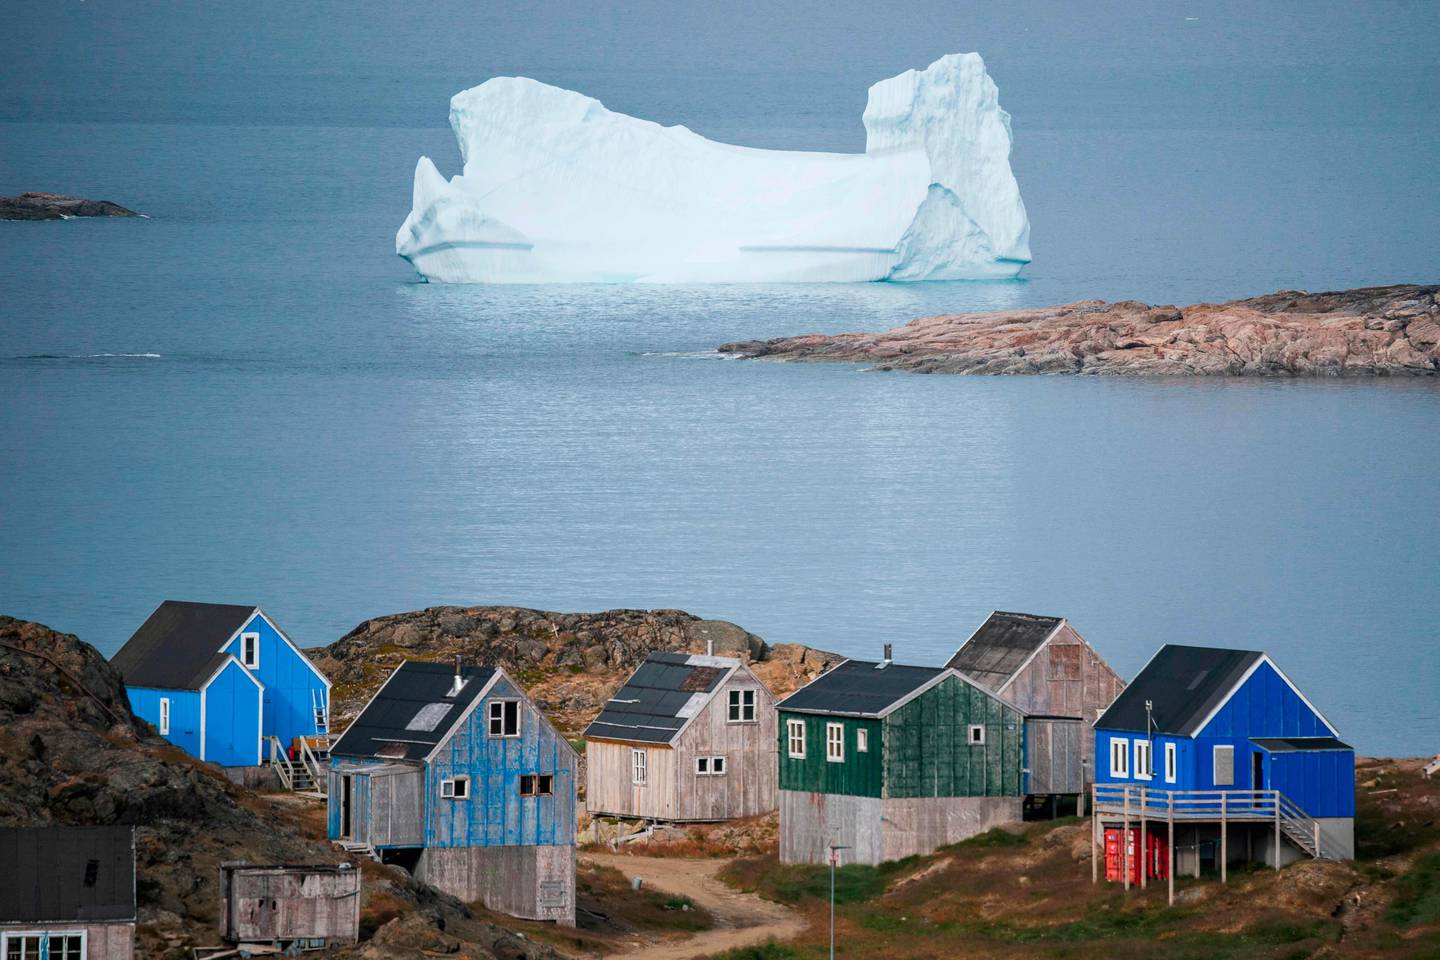 TOPSHOT - Icebergs float behind the town of Kulusuk in Greenland on August 19, 2019. - Denmark's prime minister said on August, 21, 2019 she was "annoyed and surprised" that US President Donald Trump postponed a visit after her government said its territory Greenland was not for sale, but insisted their ties remained strong. (Photo by Jonathan NACKSTRAND / AFP)